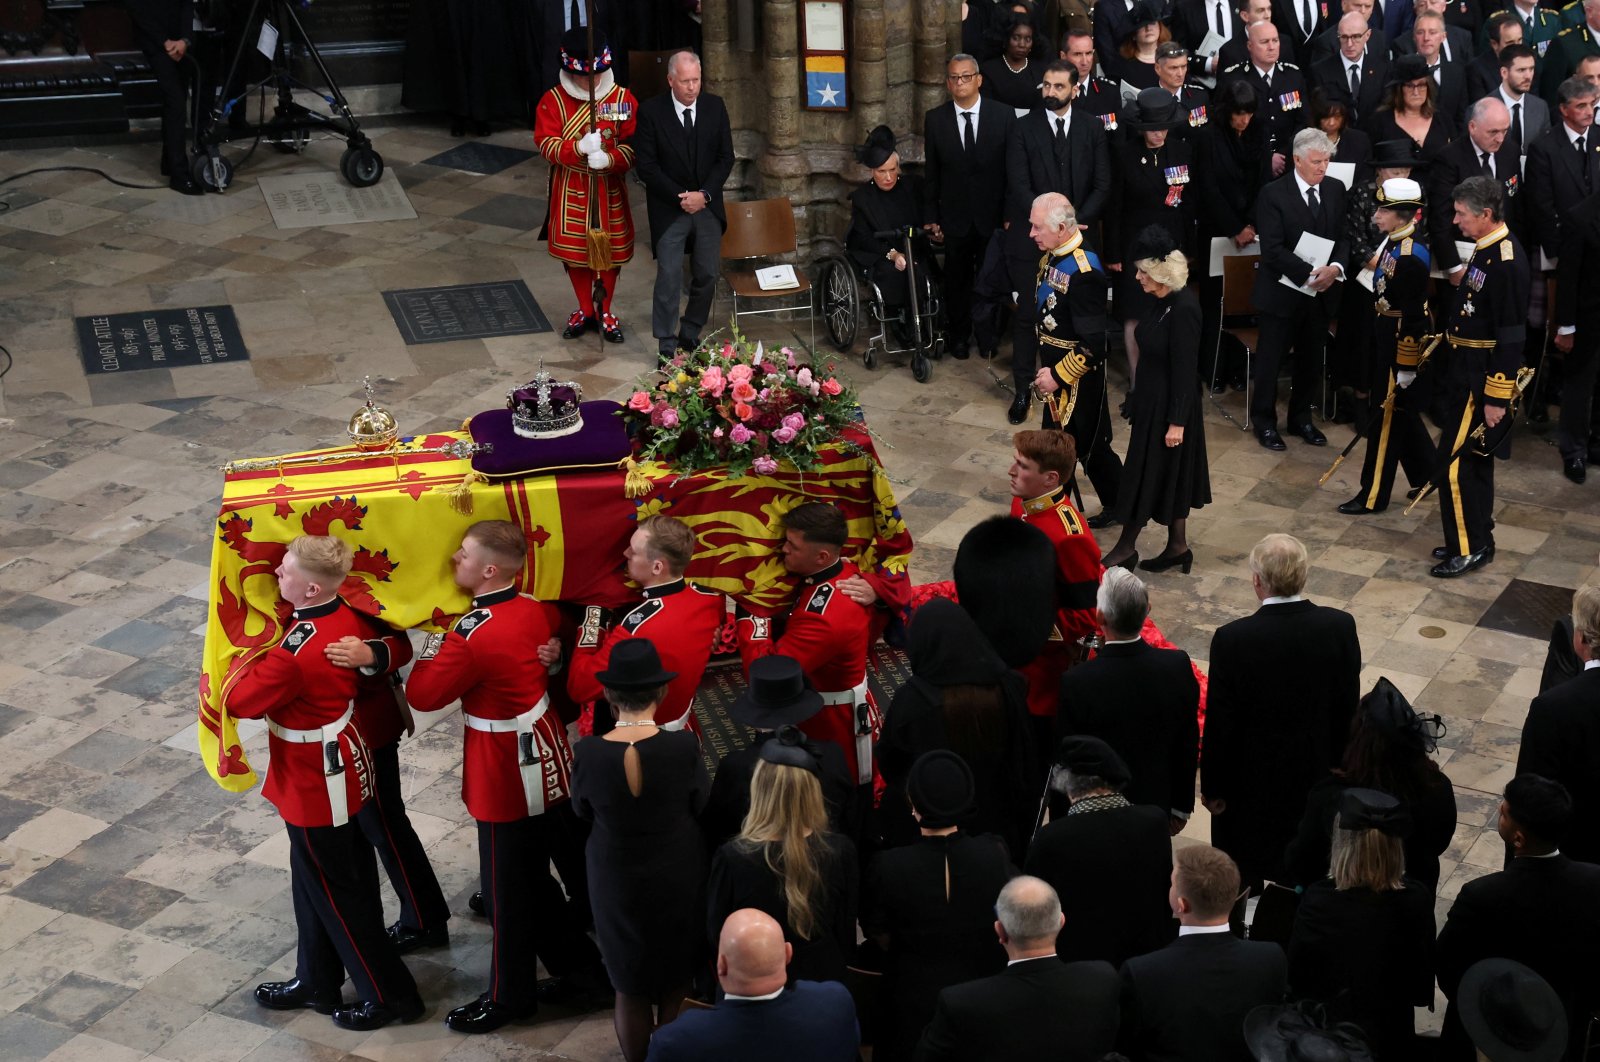 Britain&#039;s Queen Elizabeth&#039;s coffin is carried, as Britain&#039;s King Charles, Queen Camilla and Anne, Princess Royal follow, on the day of the state funeral and burial of Britain&#039;s Queen Elizabeth, at Westminster Abbey, London, England, Sept. 19, 2022. (Reuters Photo)